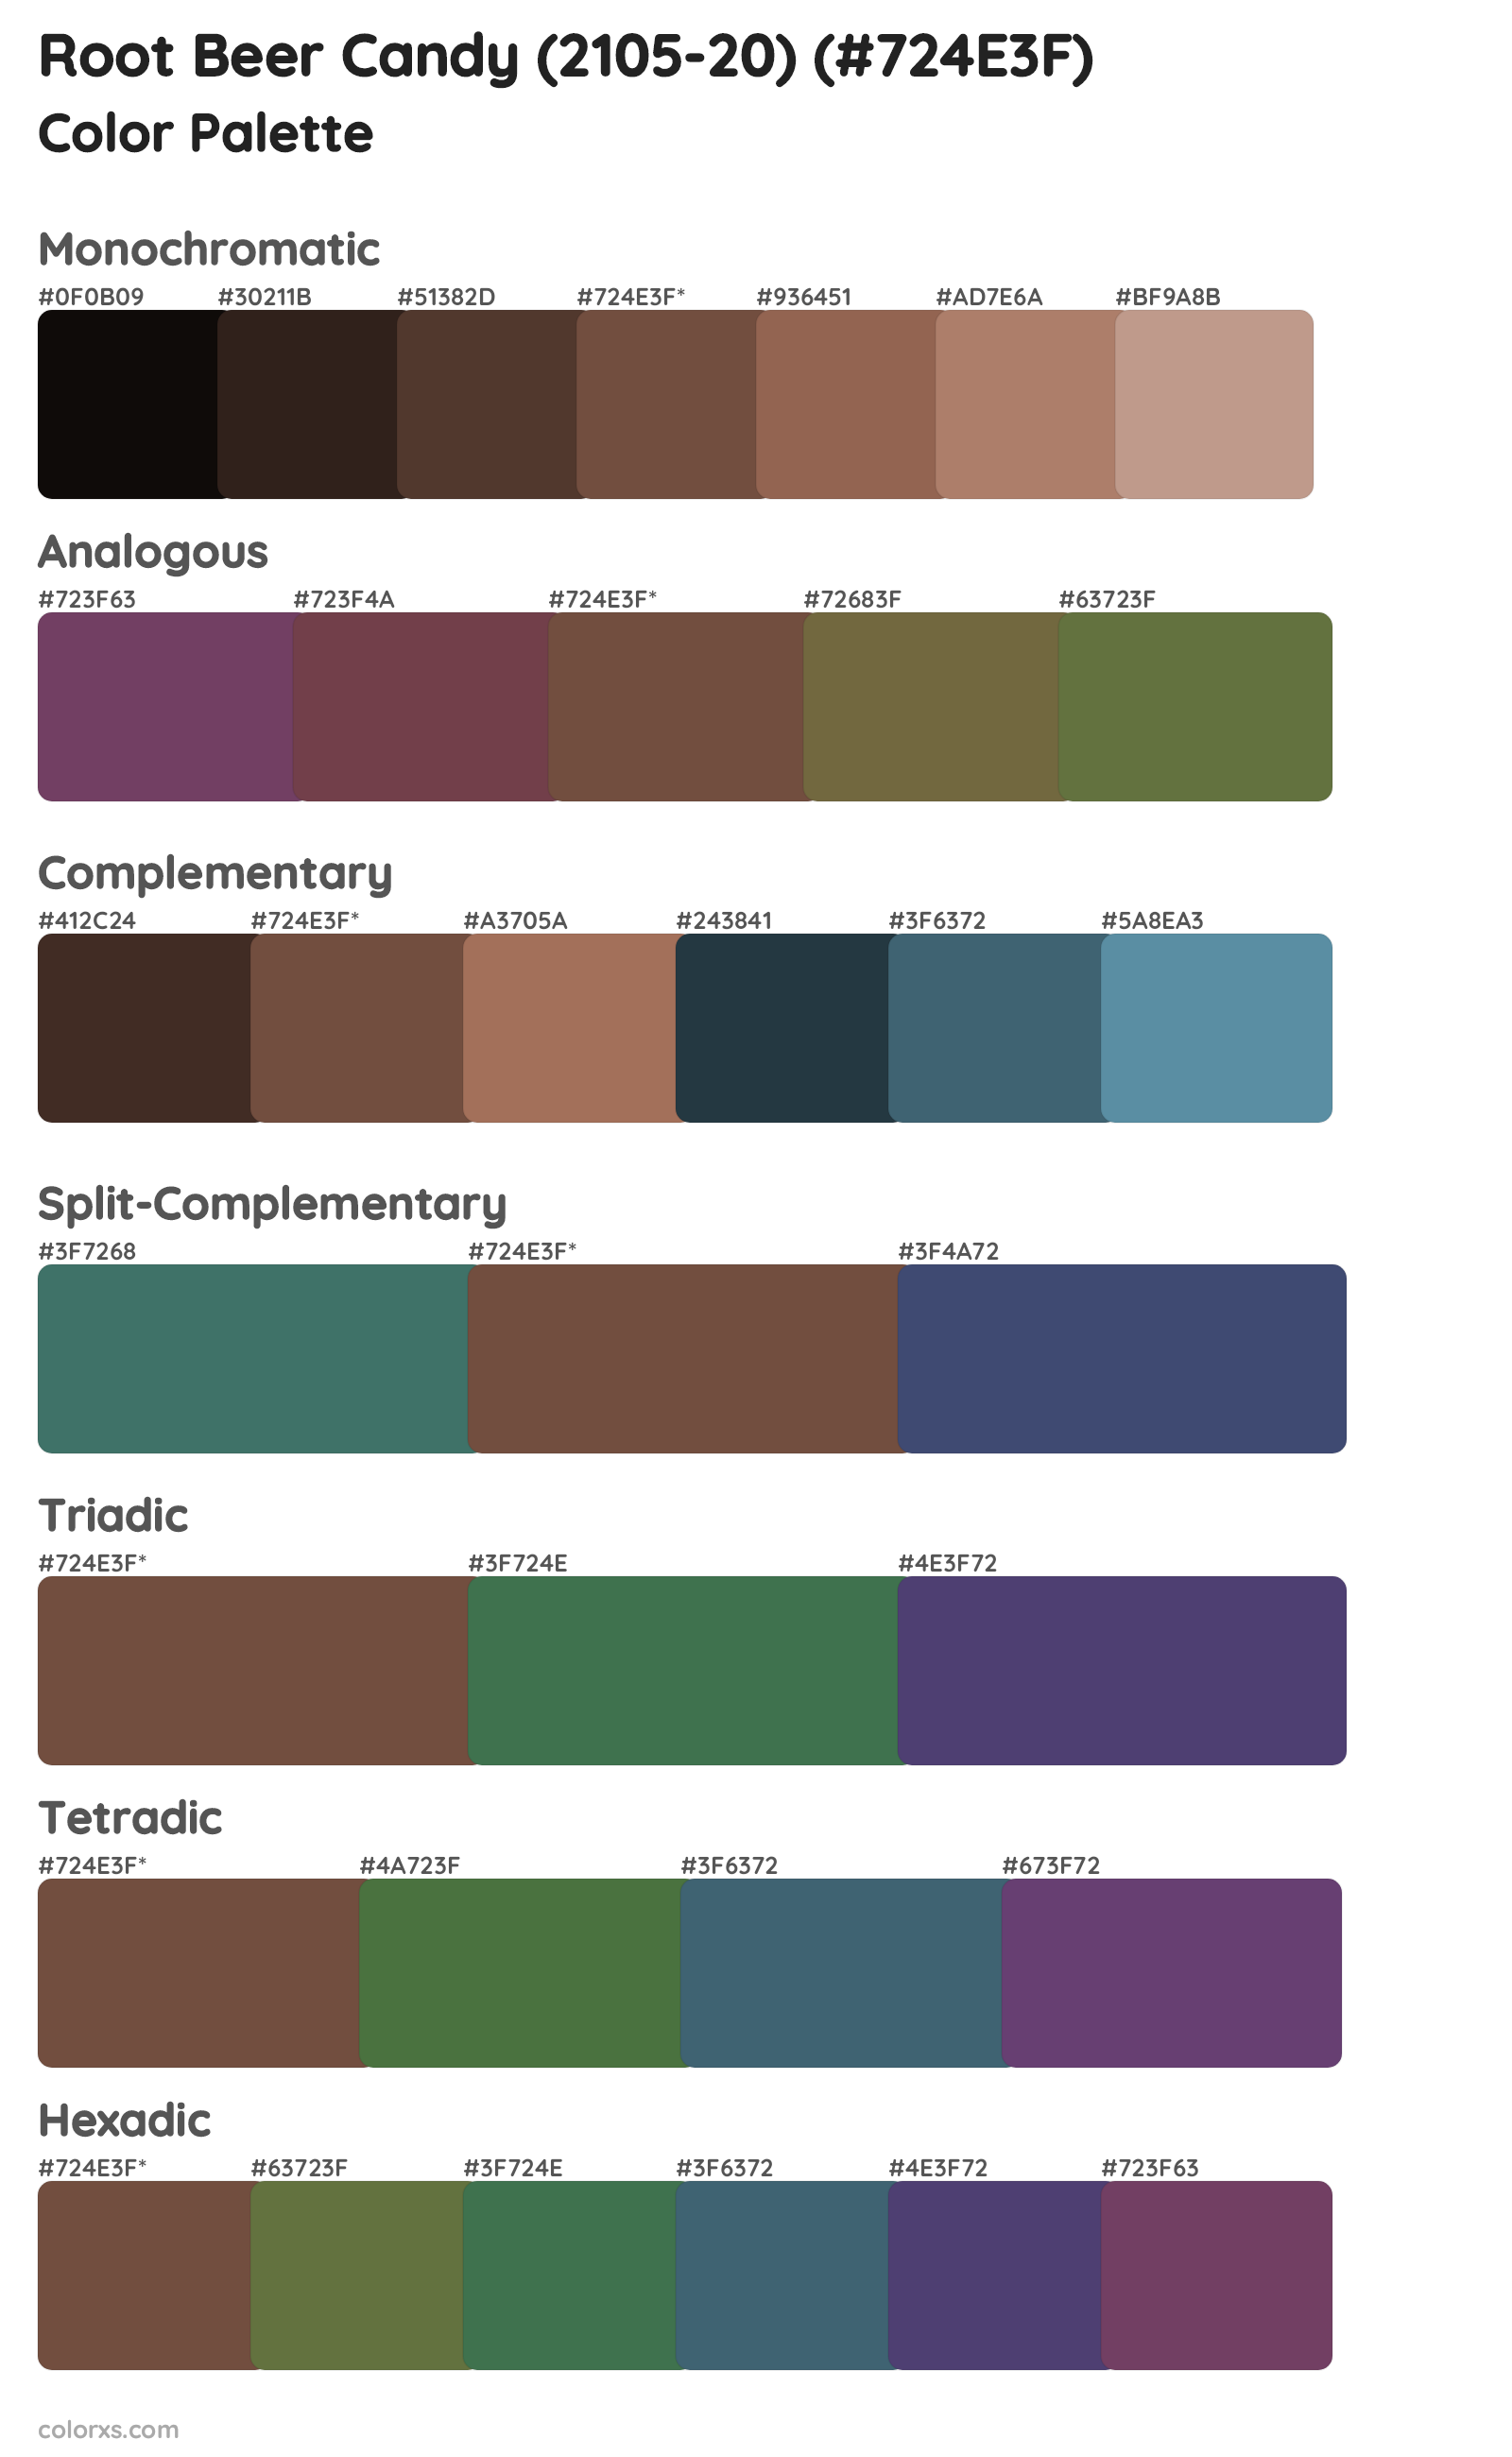 Root Beer Candy (2105-20) Color Scheme Palettes